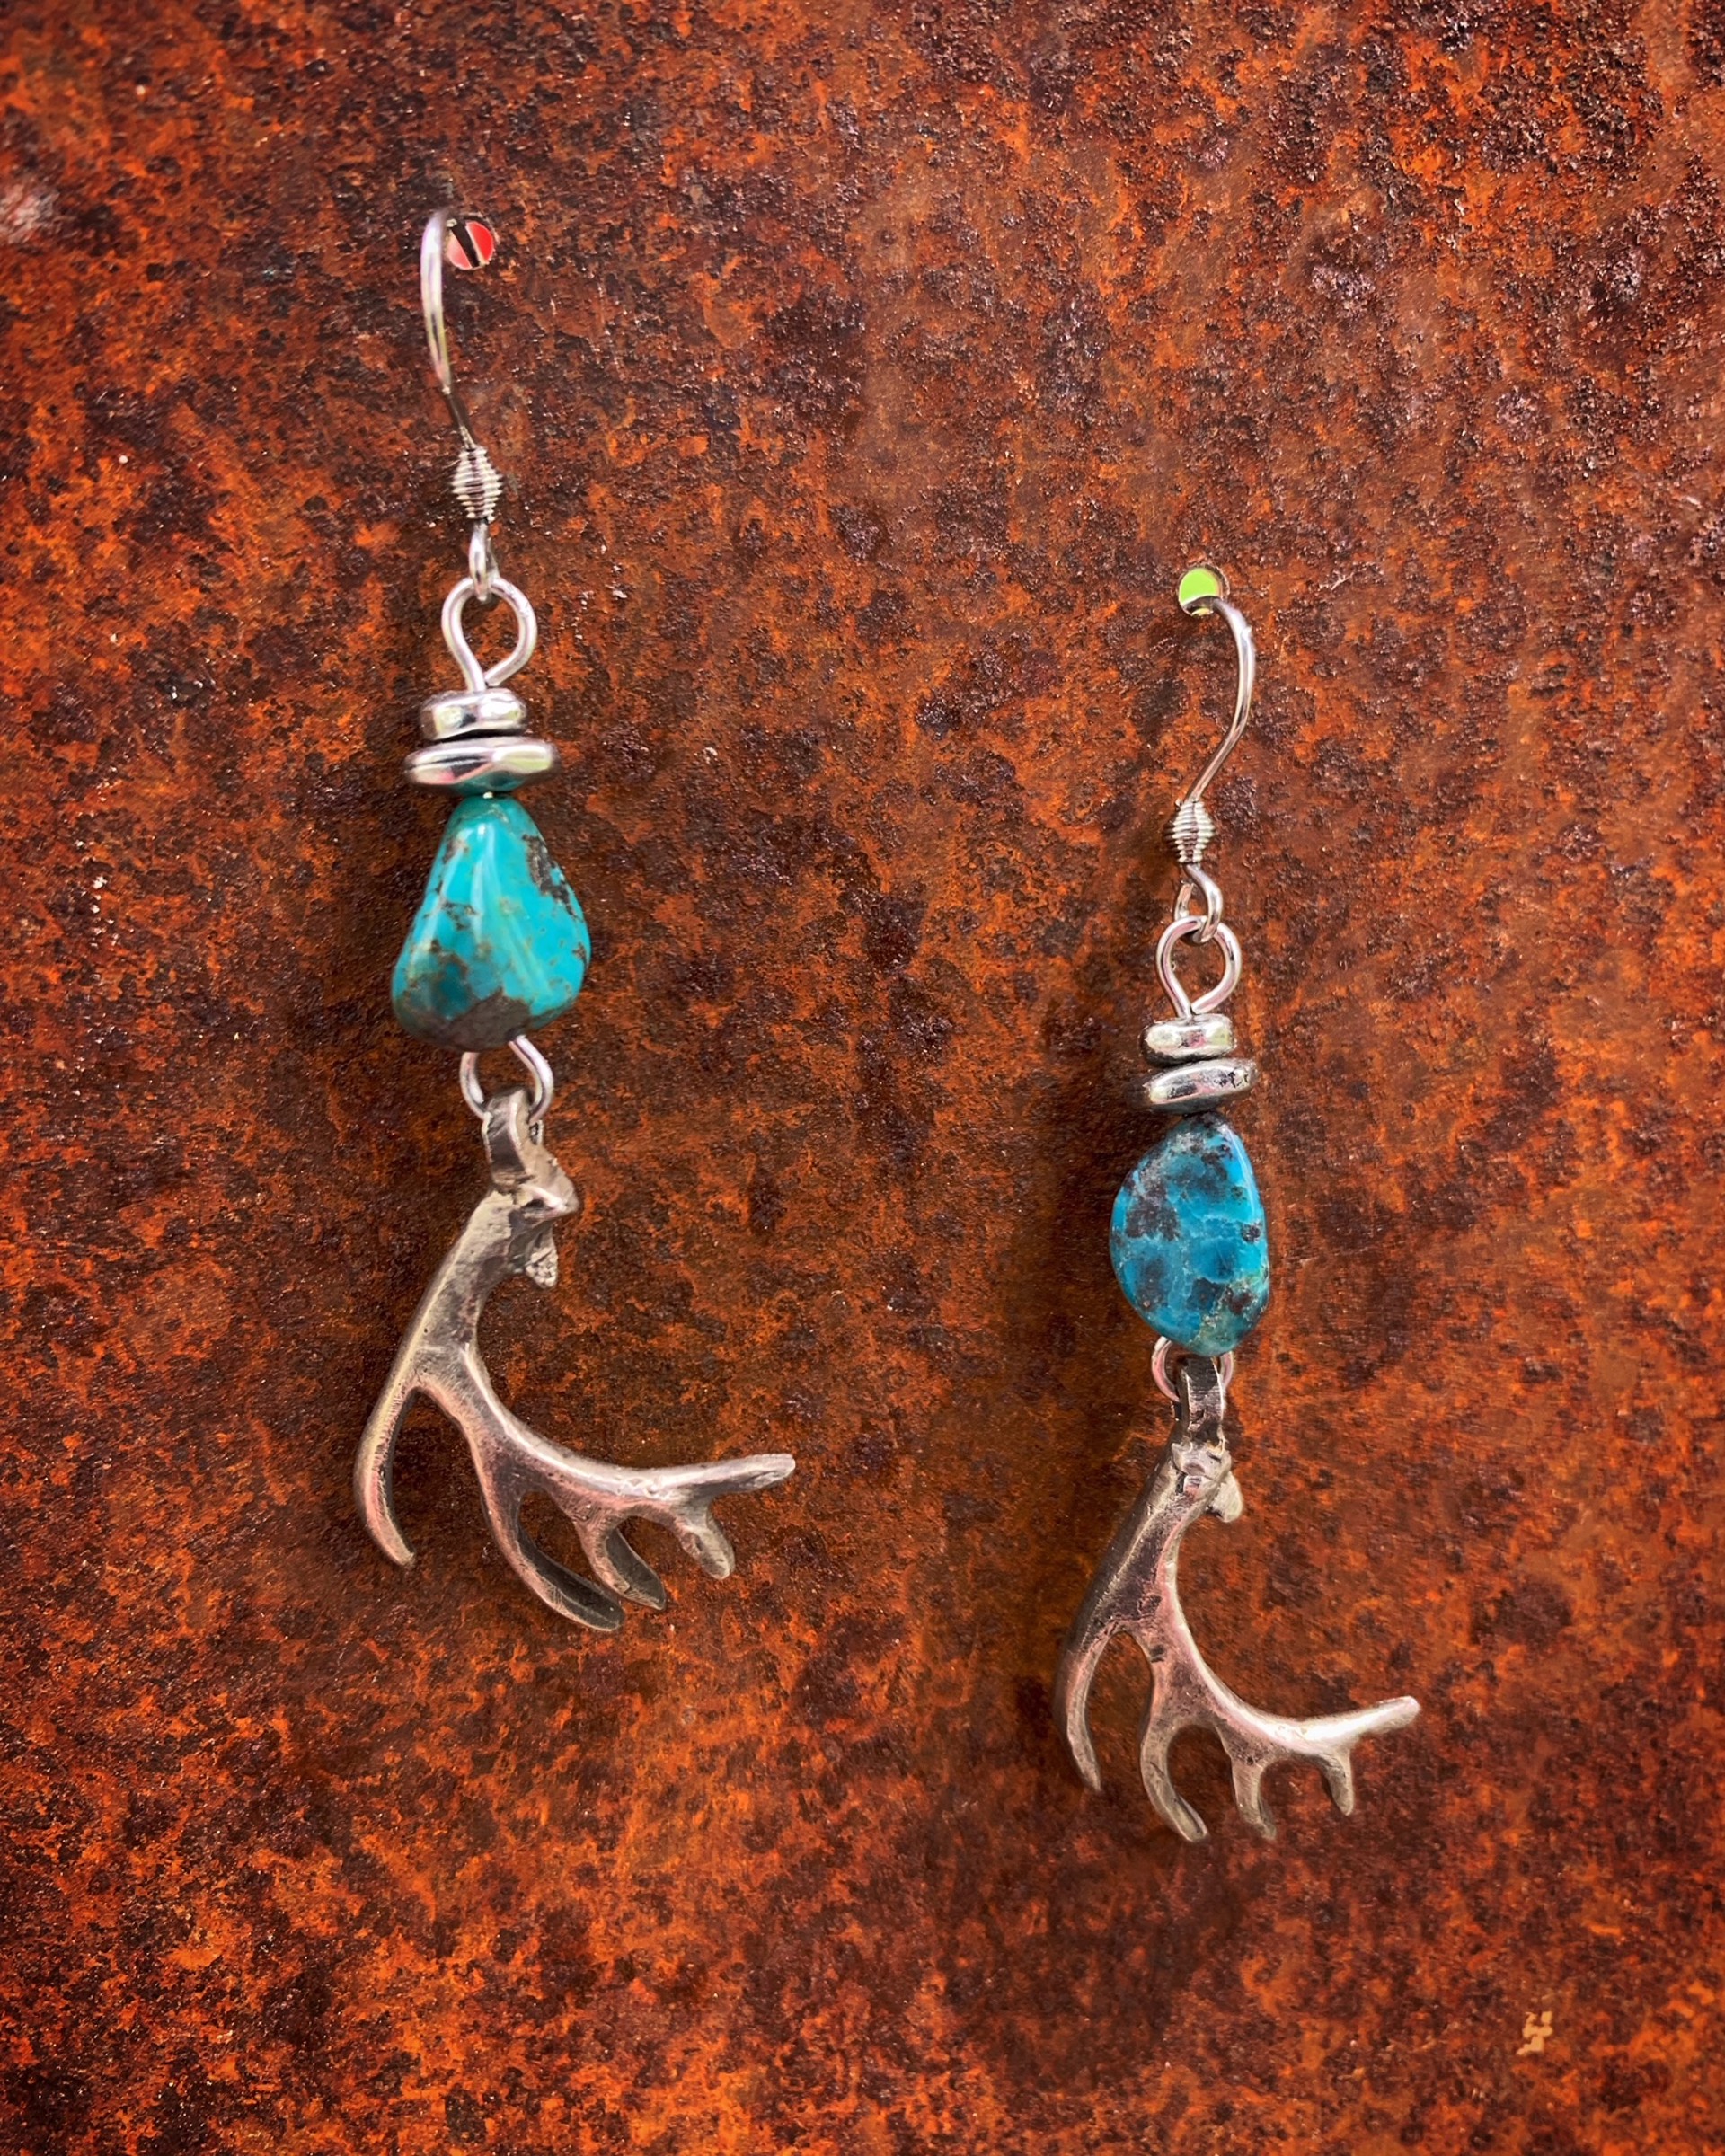 K828 Antler Earrings with Turquoise by Kelly Ormsby